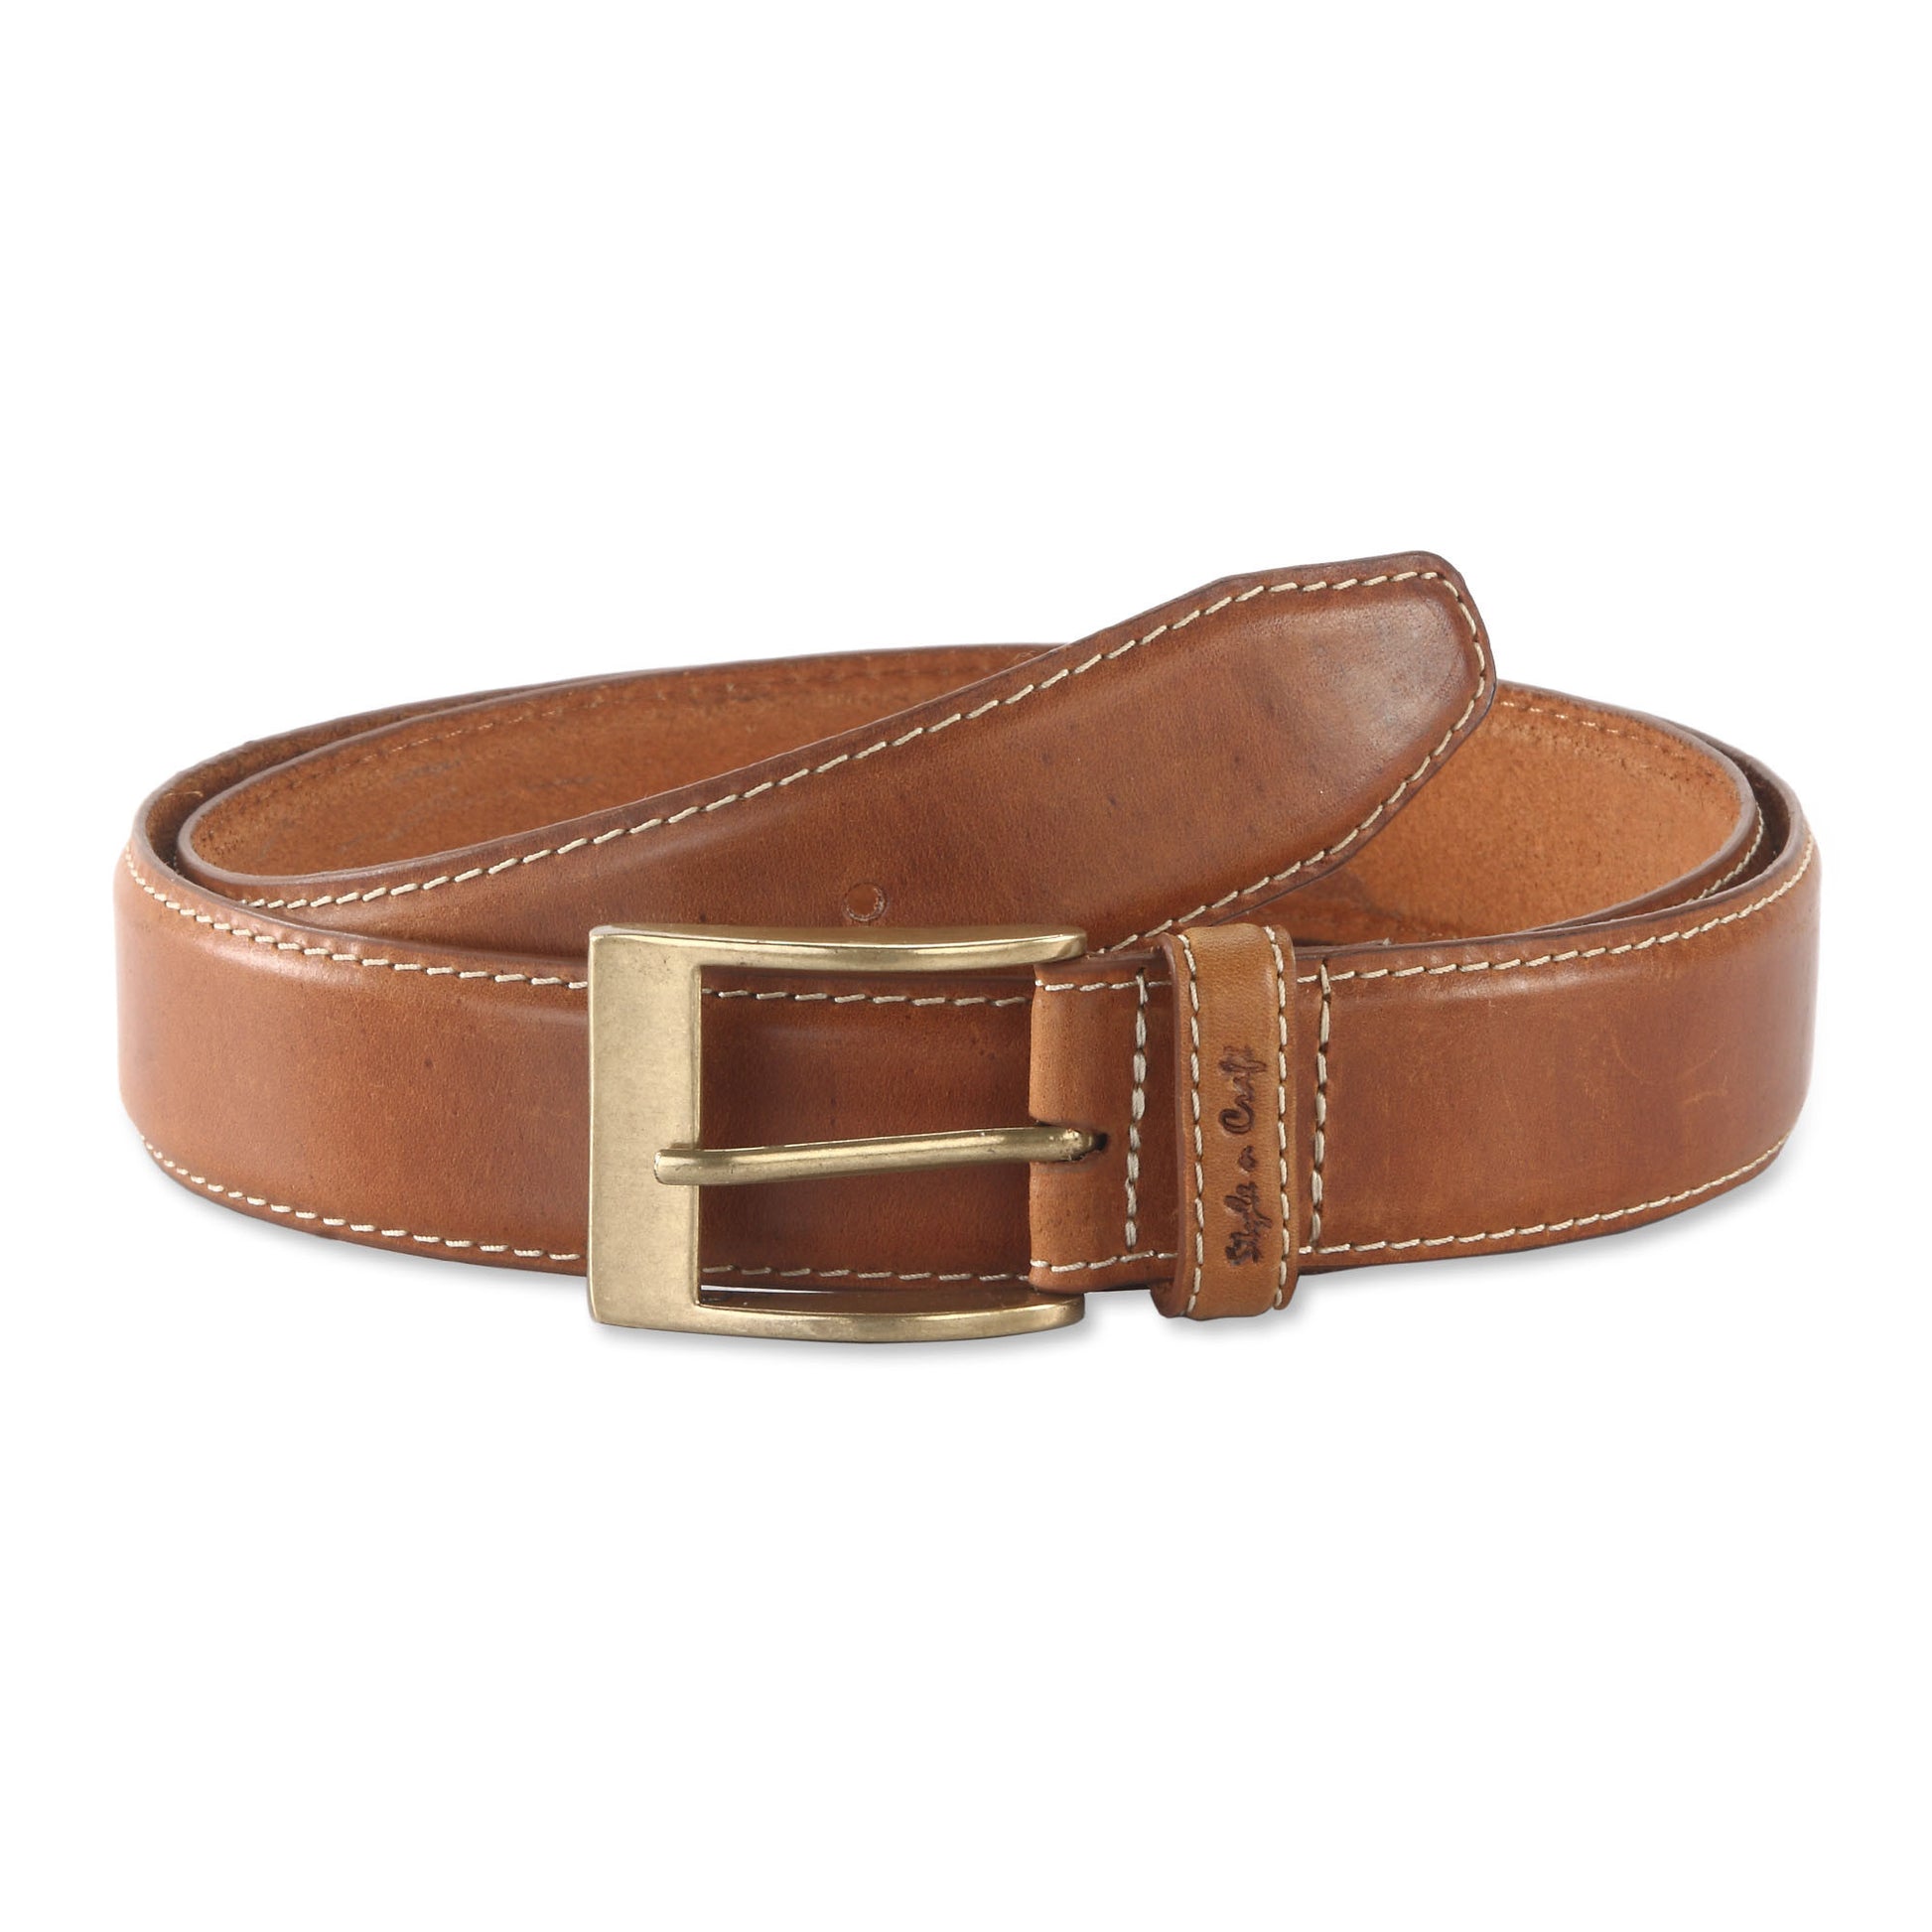 Tan Color Belt | Leather Belt in Tan Color from Style n Craft | #391901